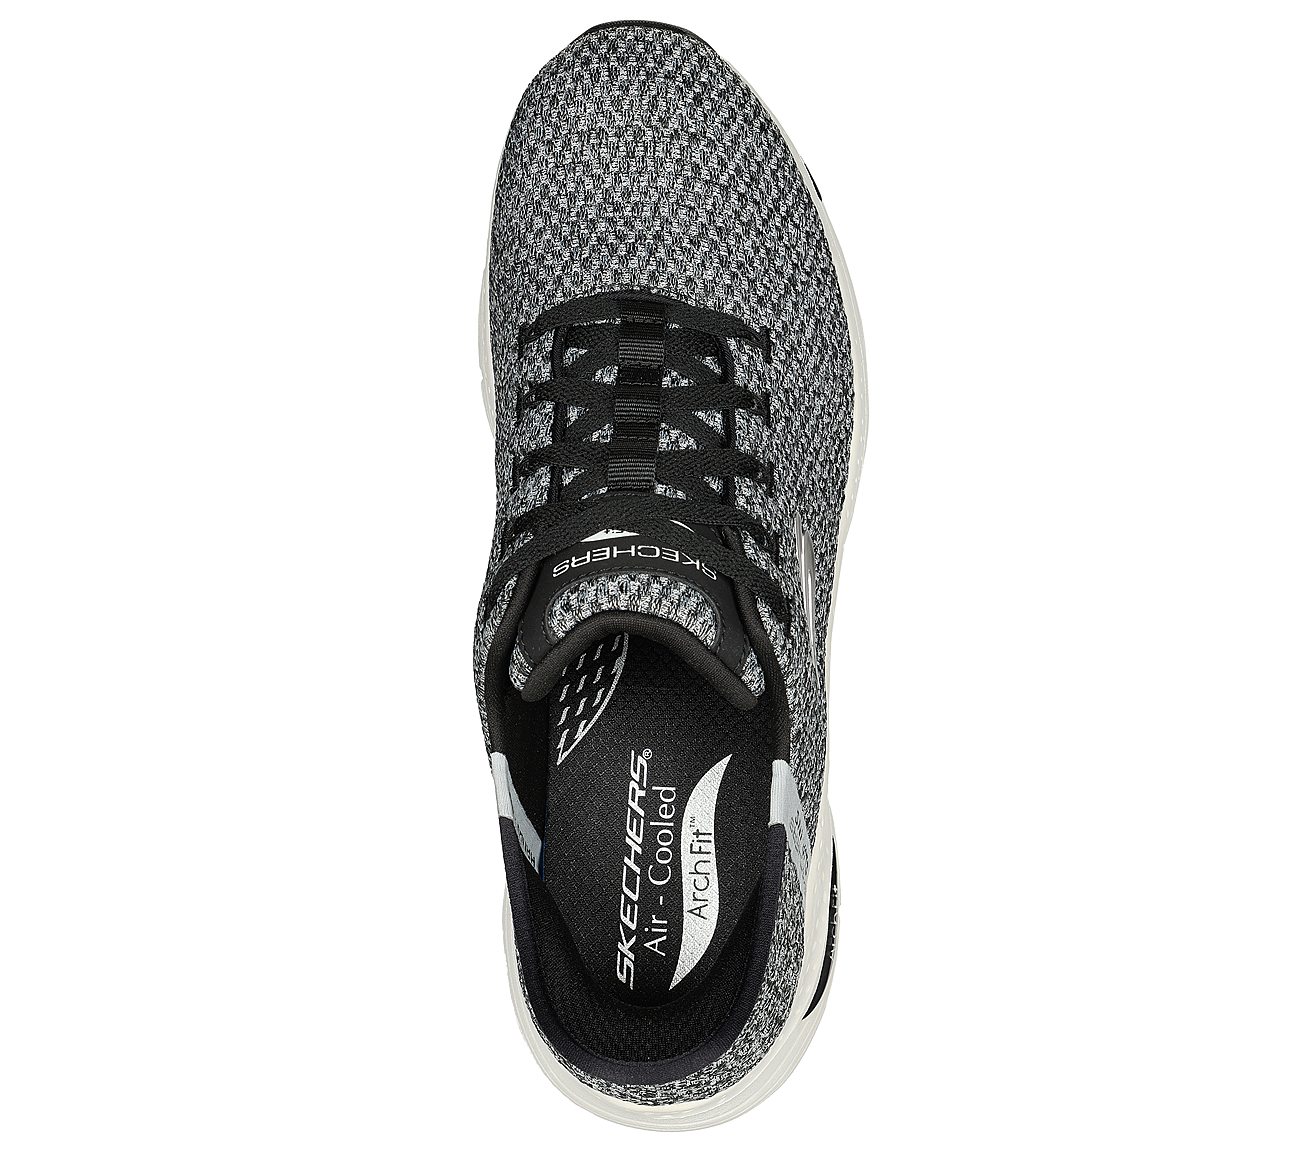 ARCH FIT, WHITE BLACK Footwear Top View